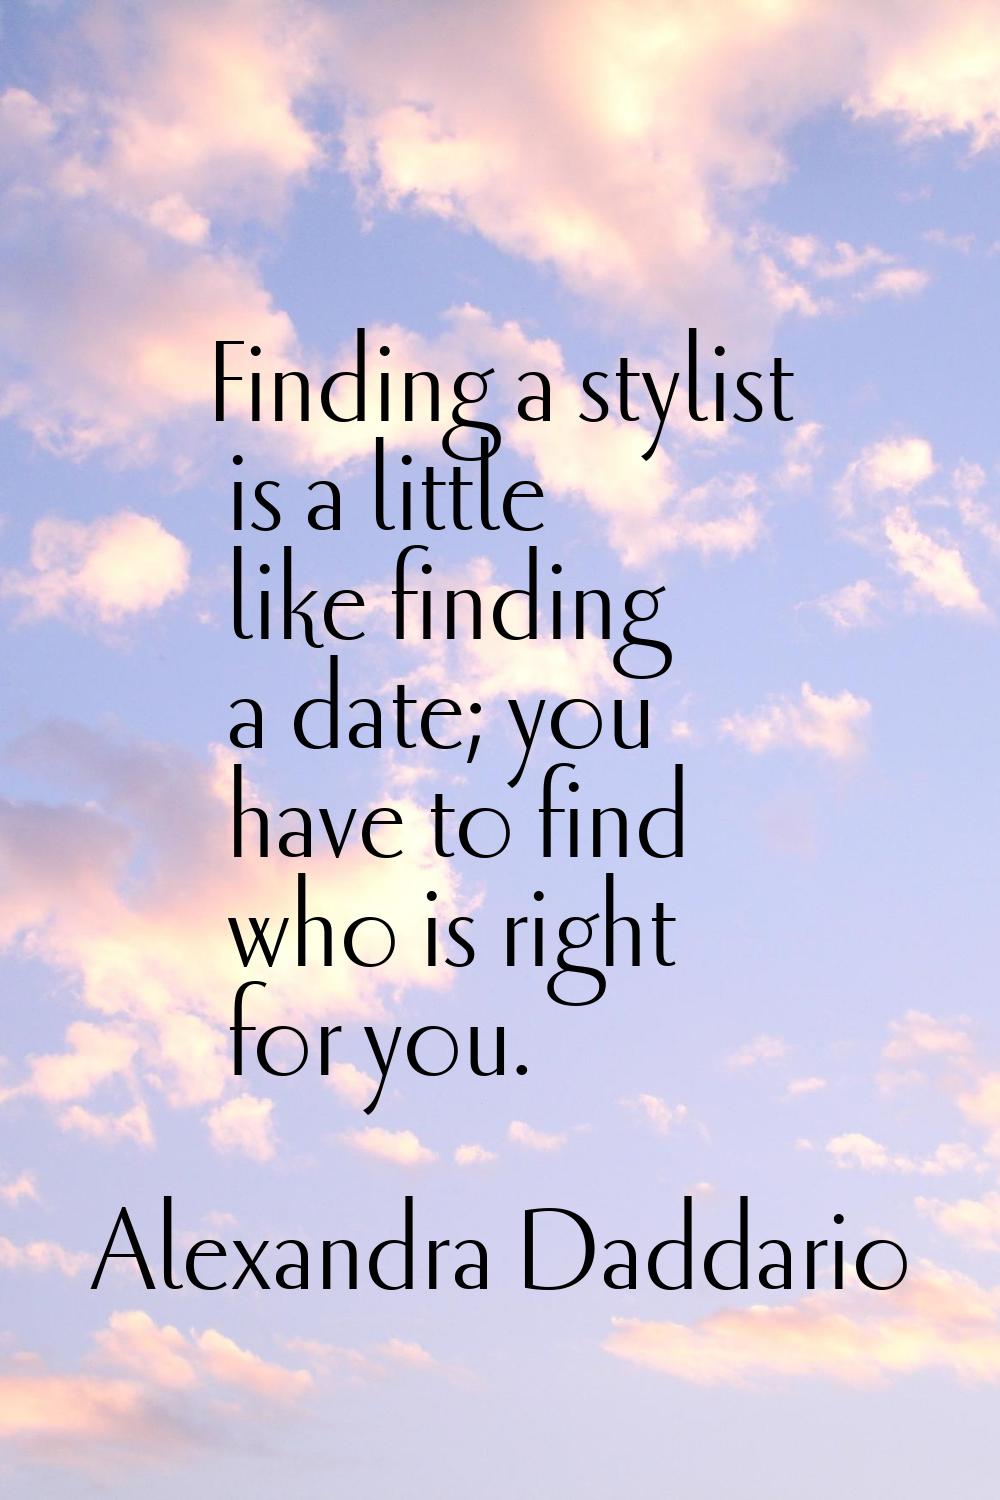 Finding a stylist is a little like finding a date; you have to find who is right for you.